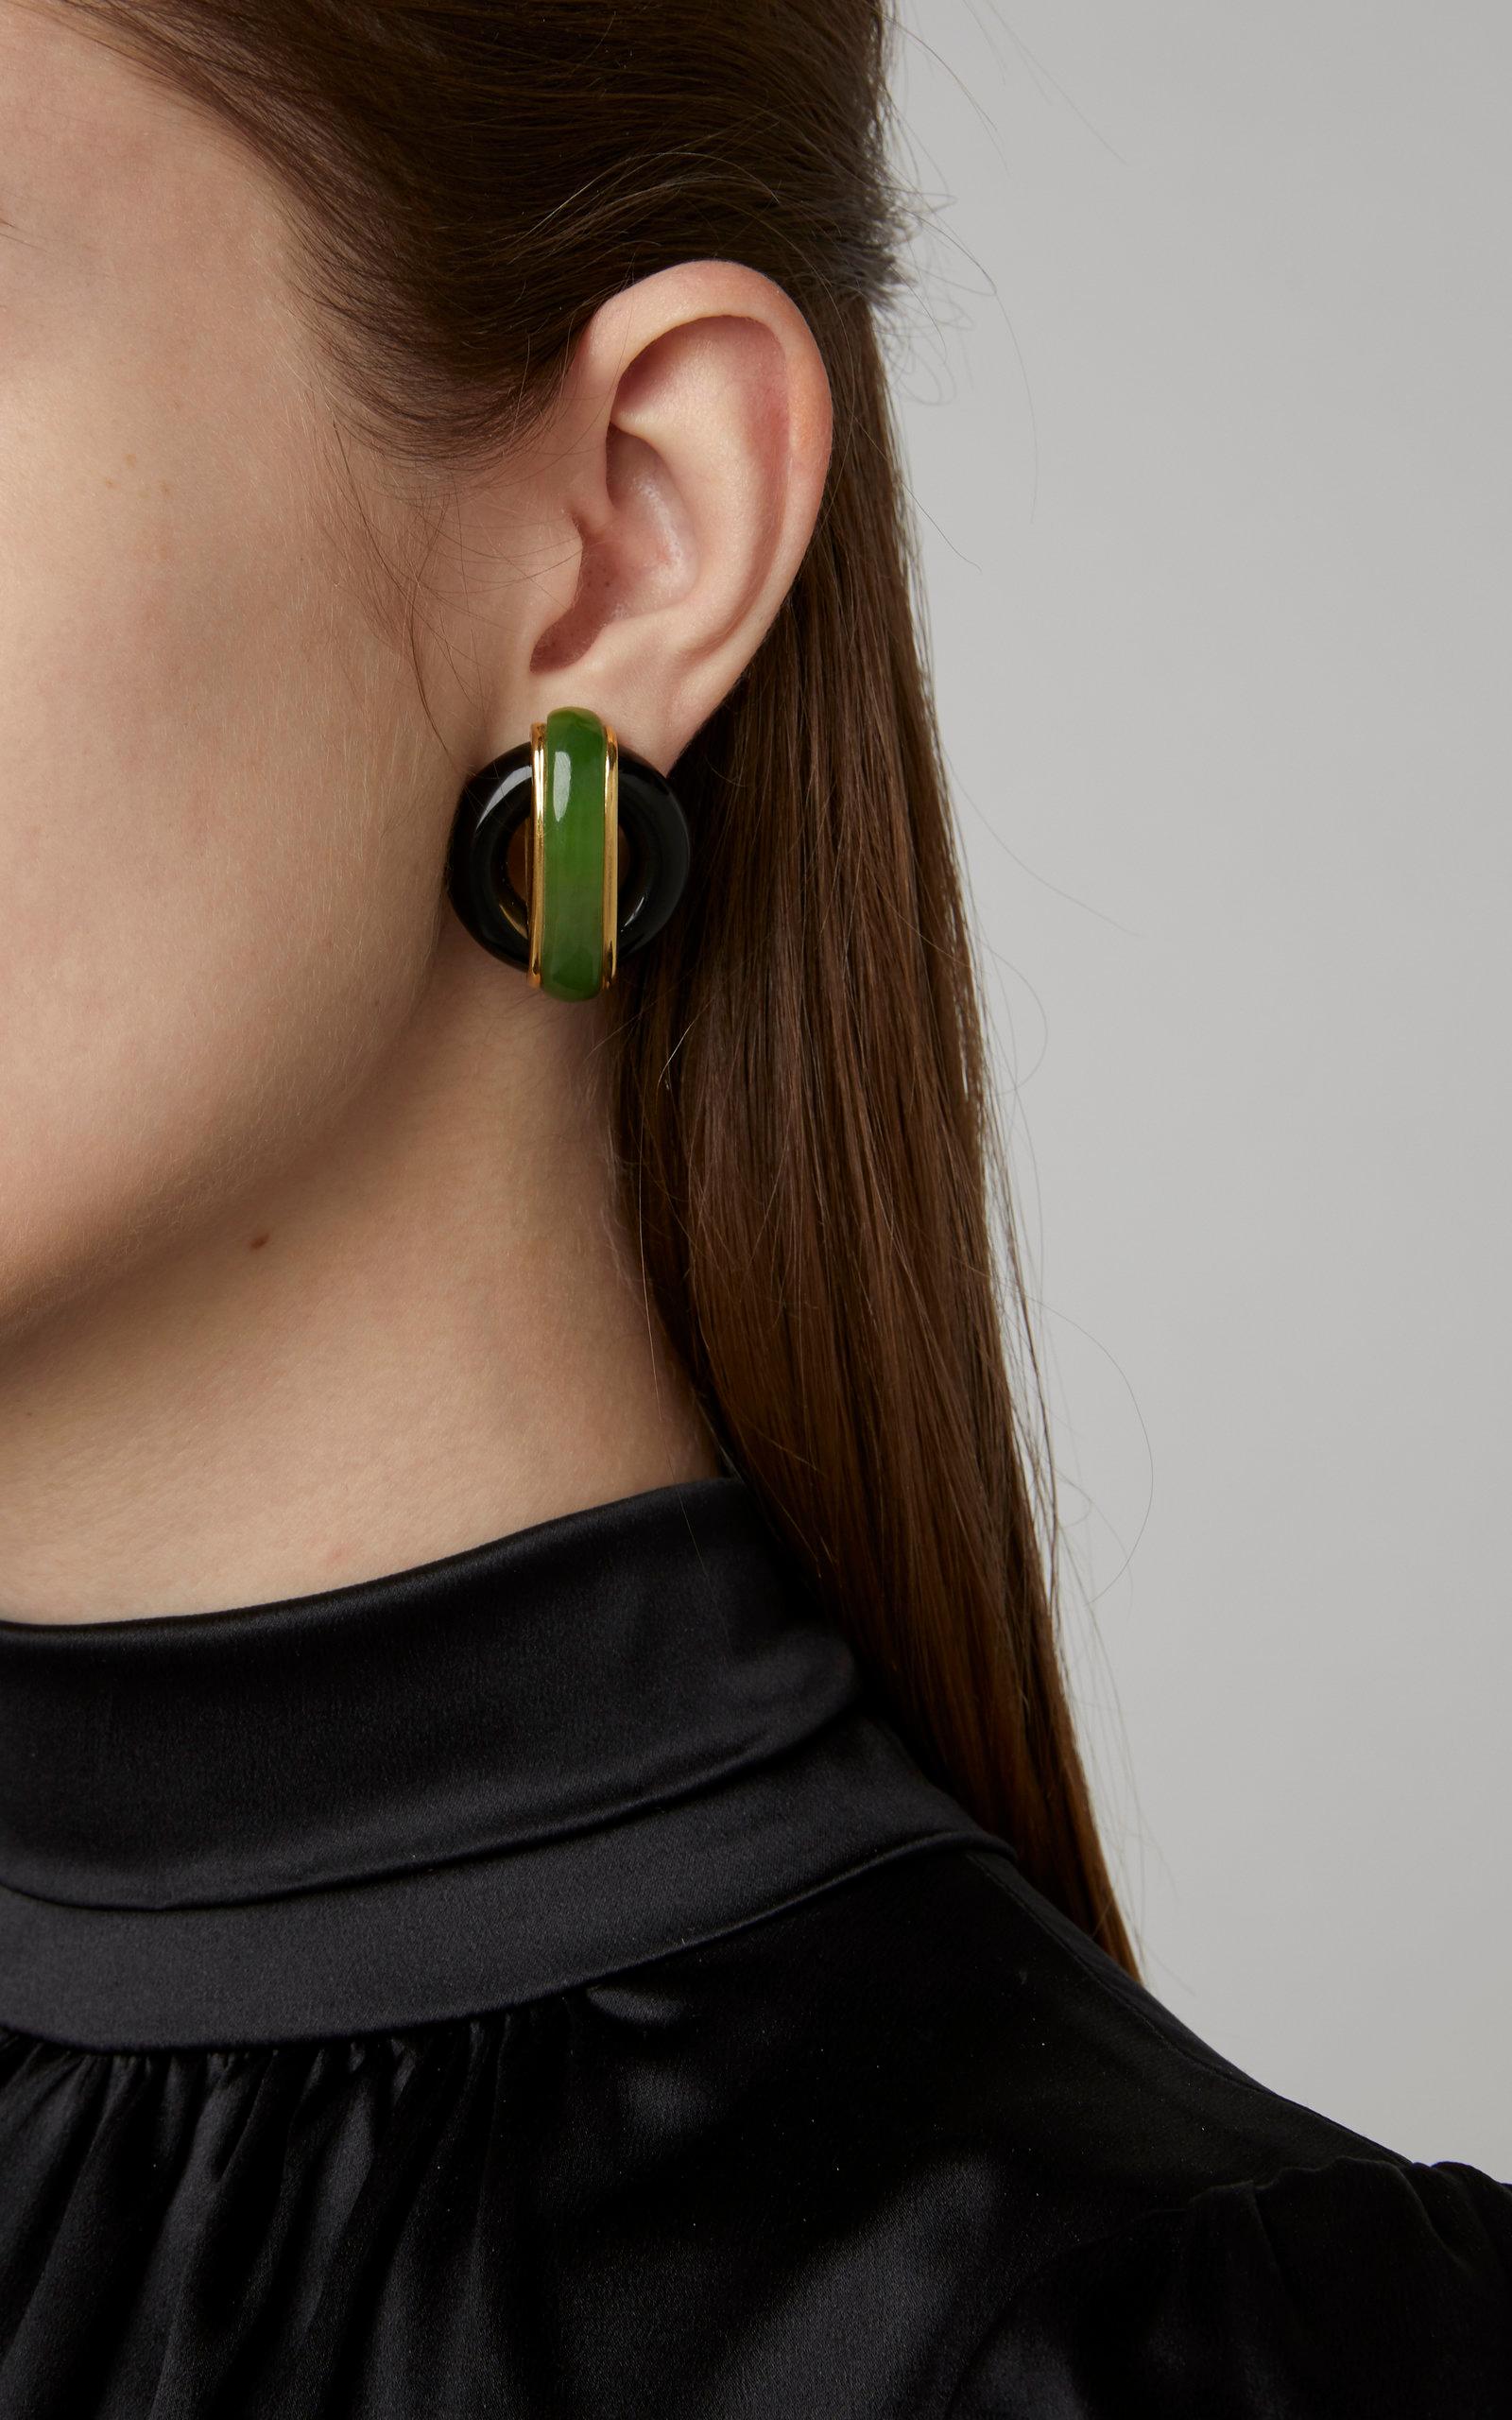 A pair of iconic Cartier ear-clips designed by esteemed Italian designer Aldo Cipullo, with jade and onyx, mounted on 18kt yellow gold. Dated 1972.